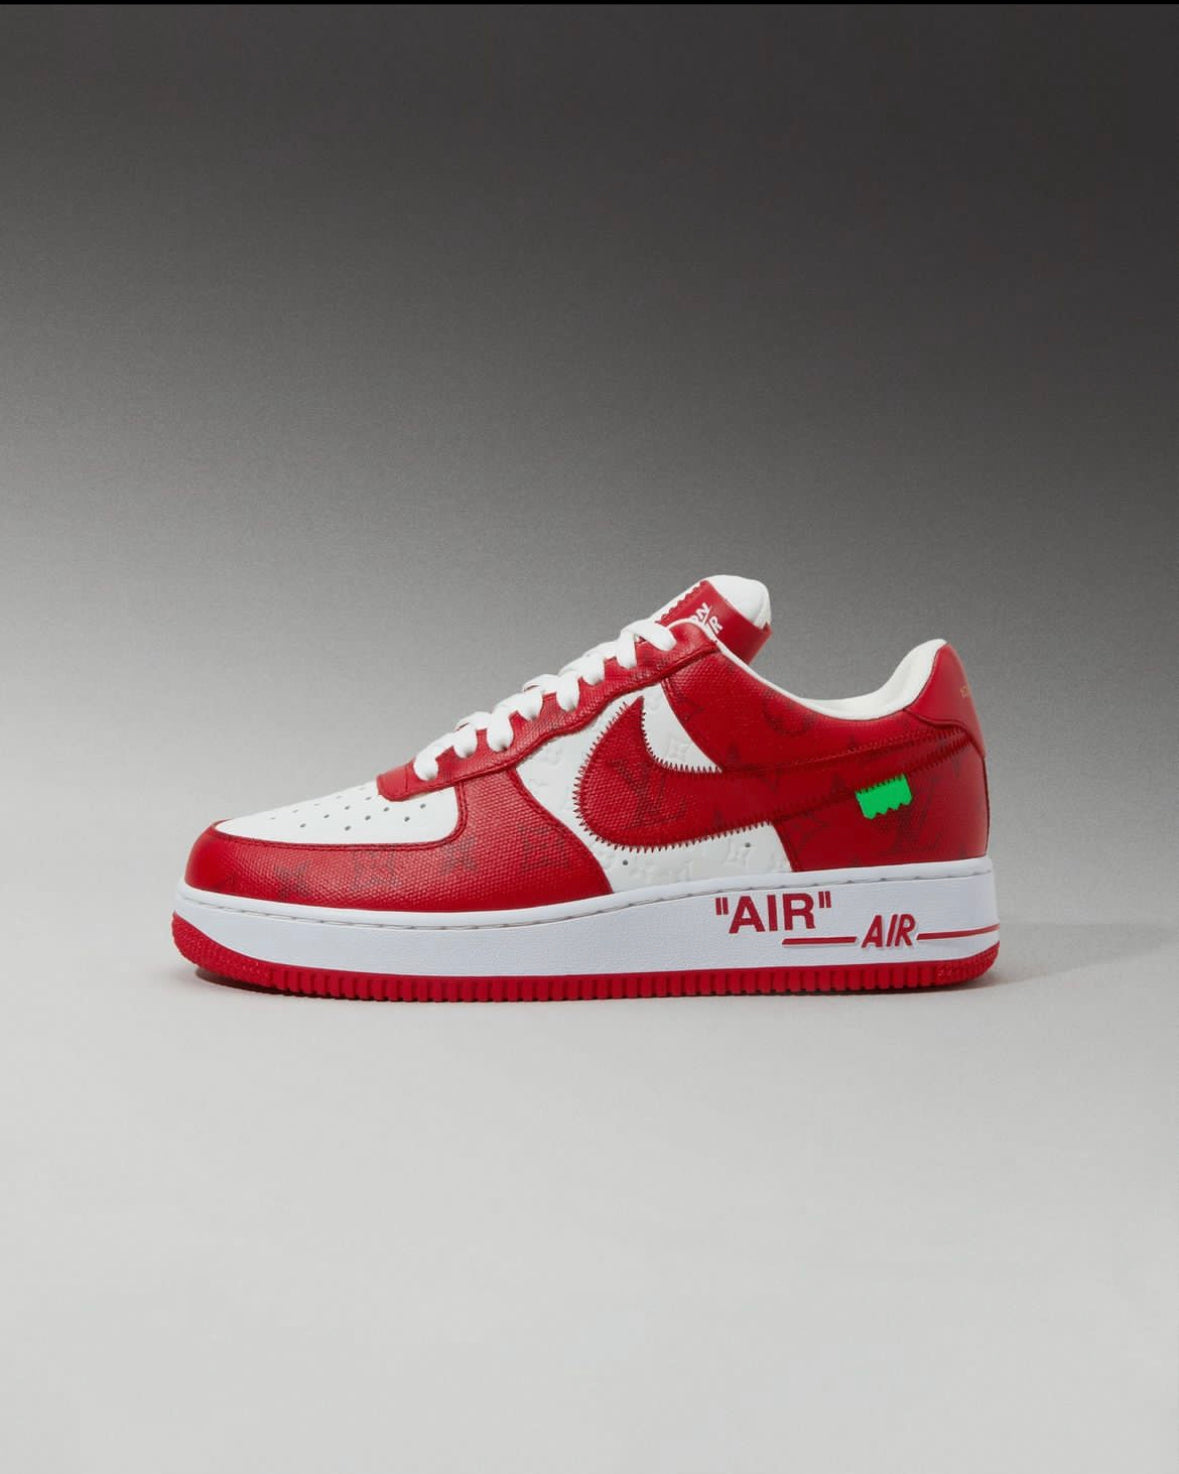 Nike Air Force 1 Low x Louis Vuitton by Virgil Abloh White Red 10.5